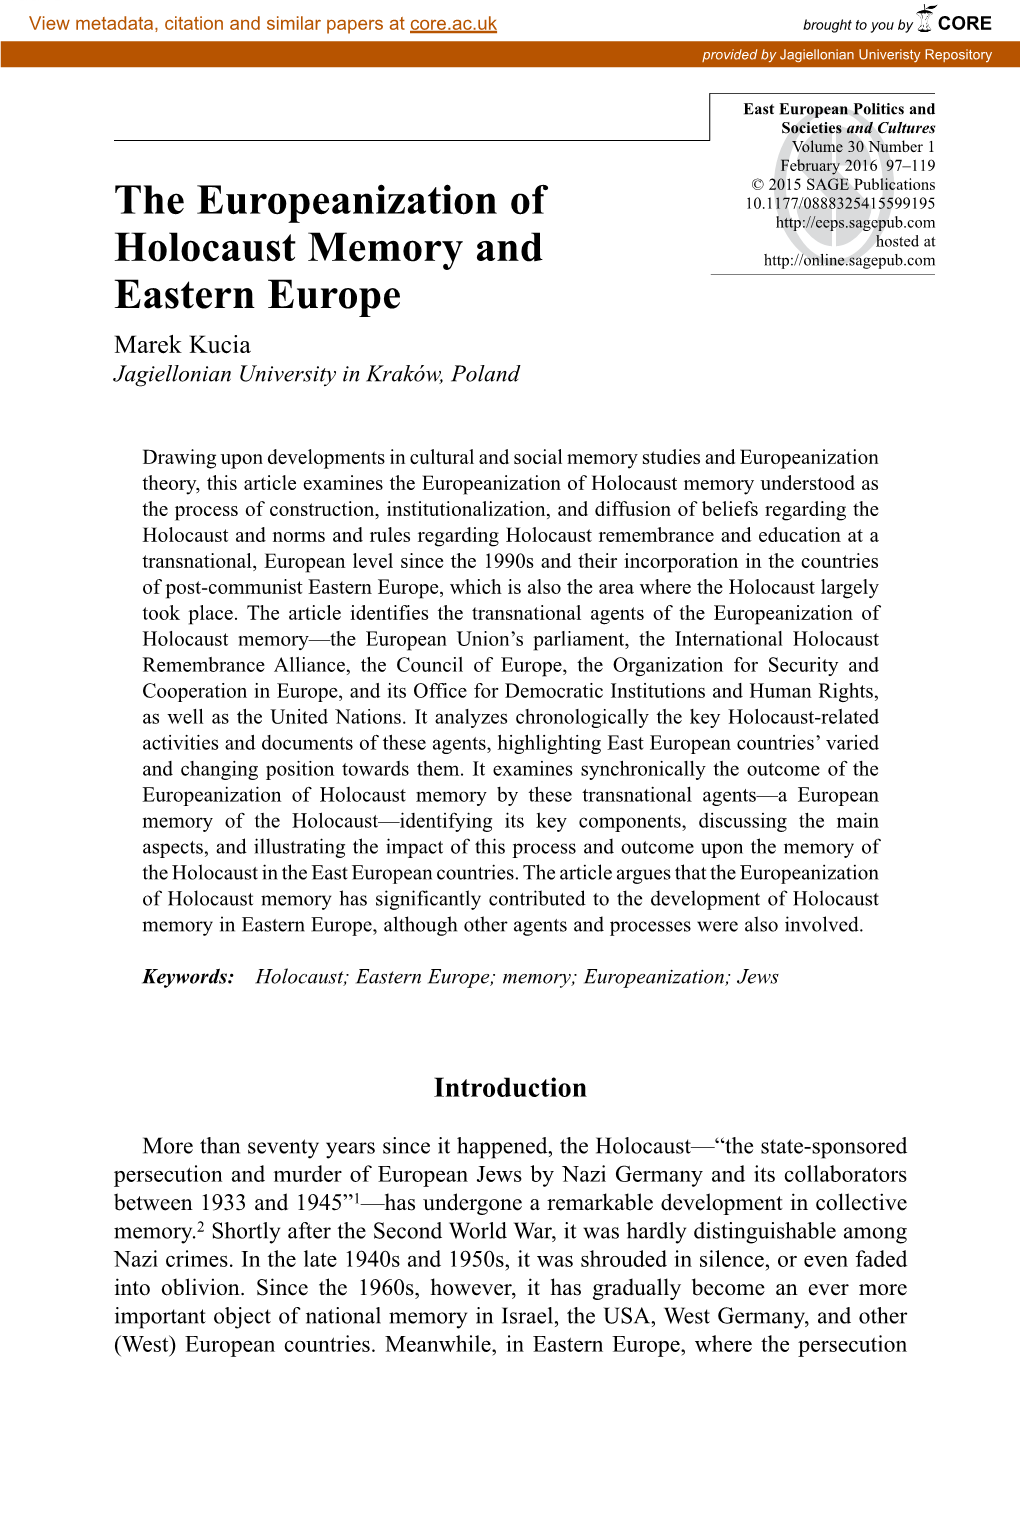 The Europeanization of Holocaust Memory and Eastern Europe